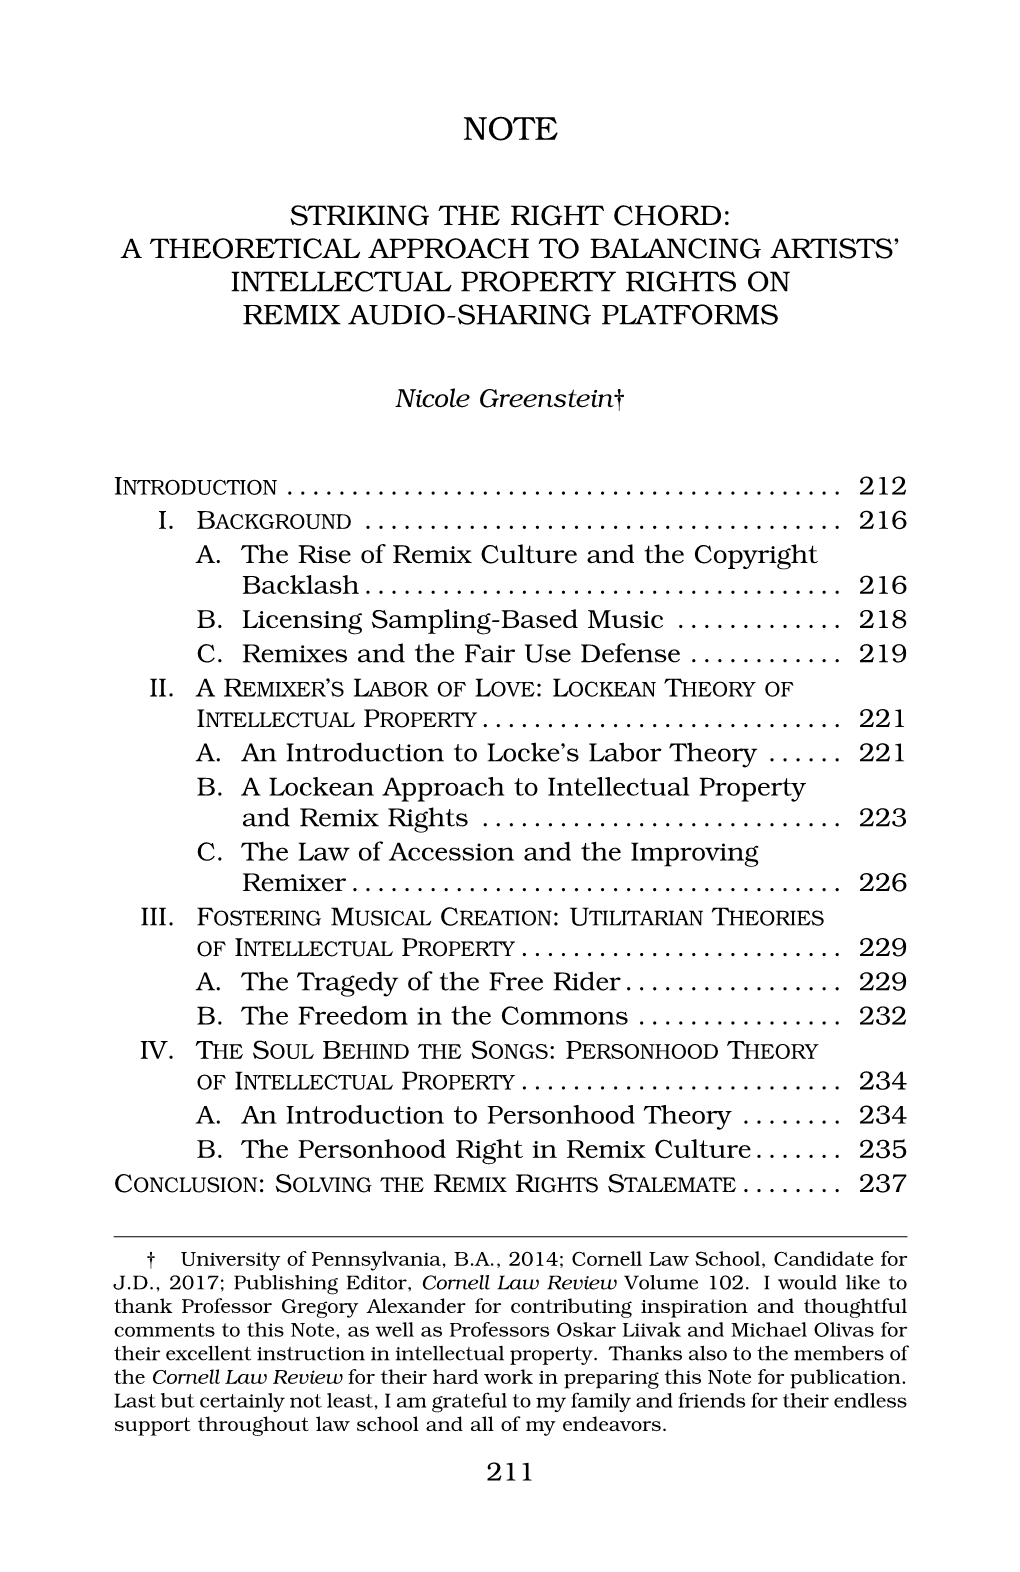 Striking the Right Chord: a Theoretical Approach to Balancing Artists’ Intellectual Property Rights on Remix Audio-Sharing Platforms